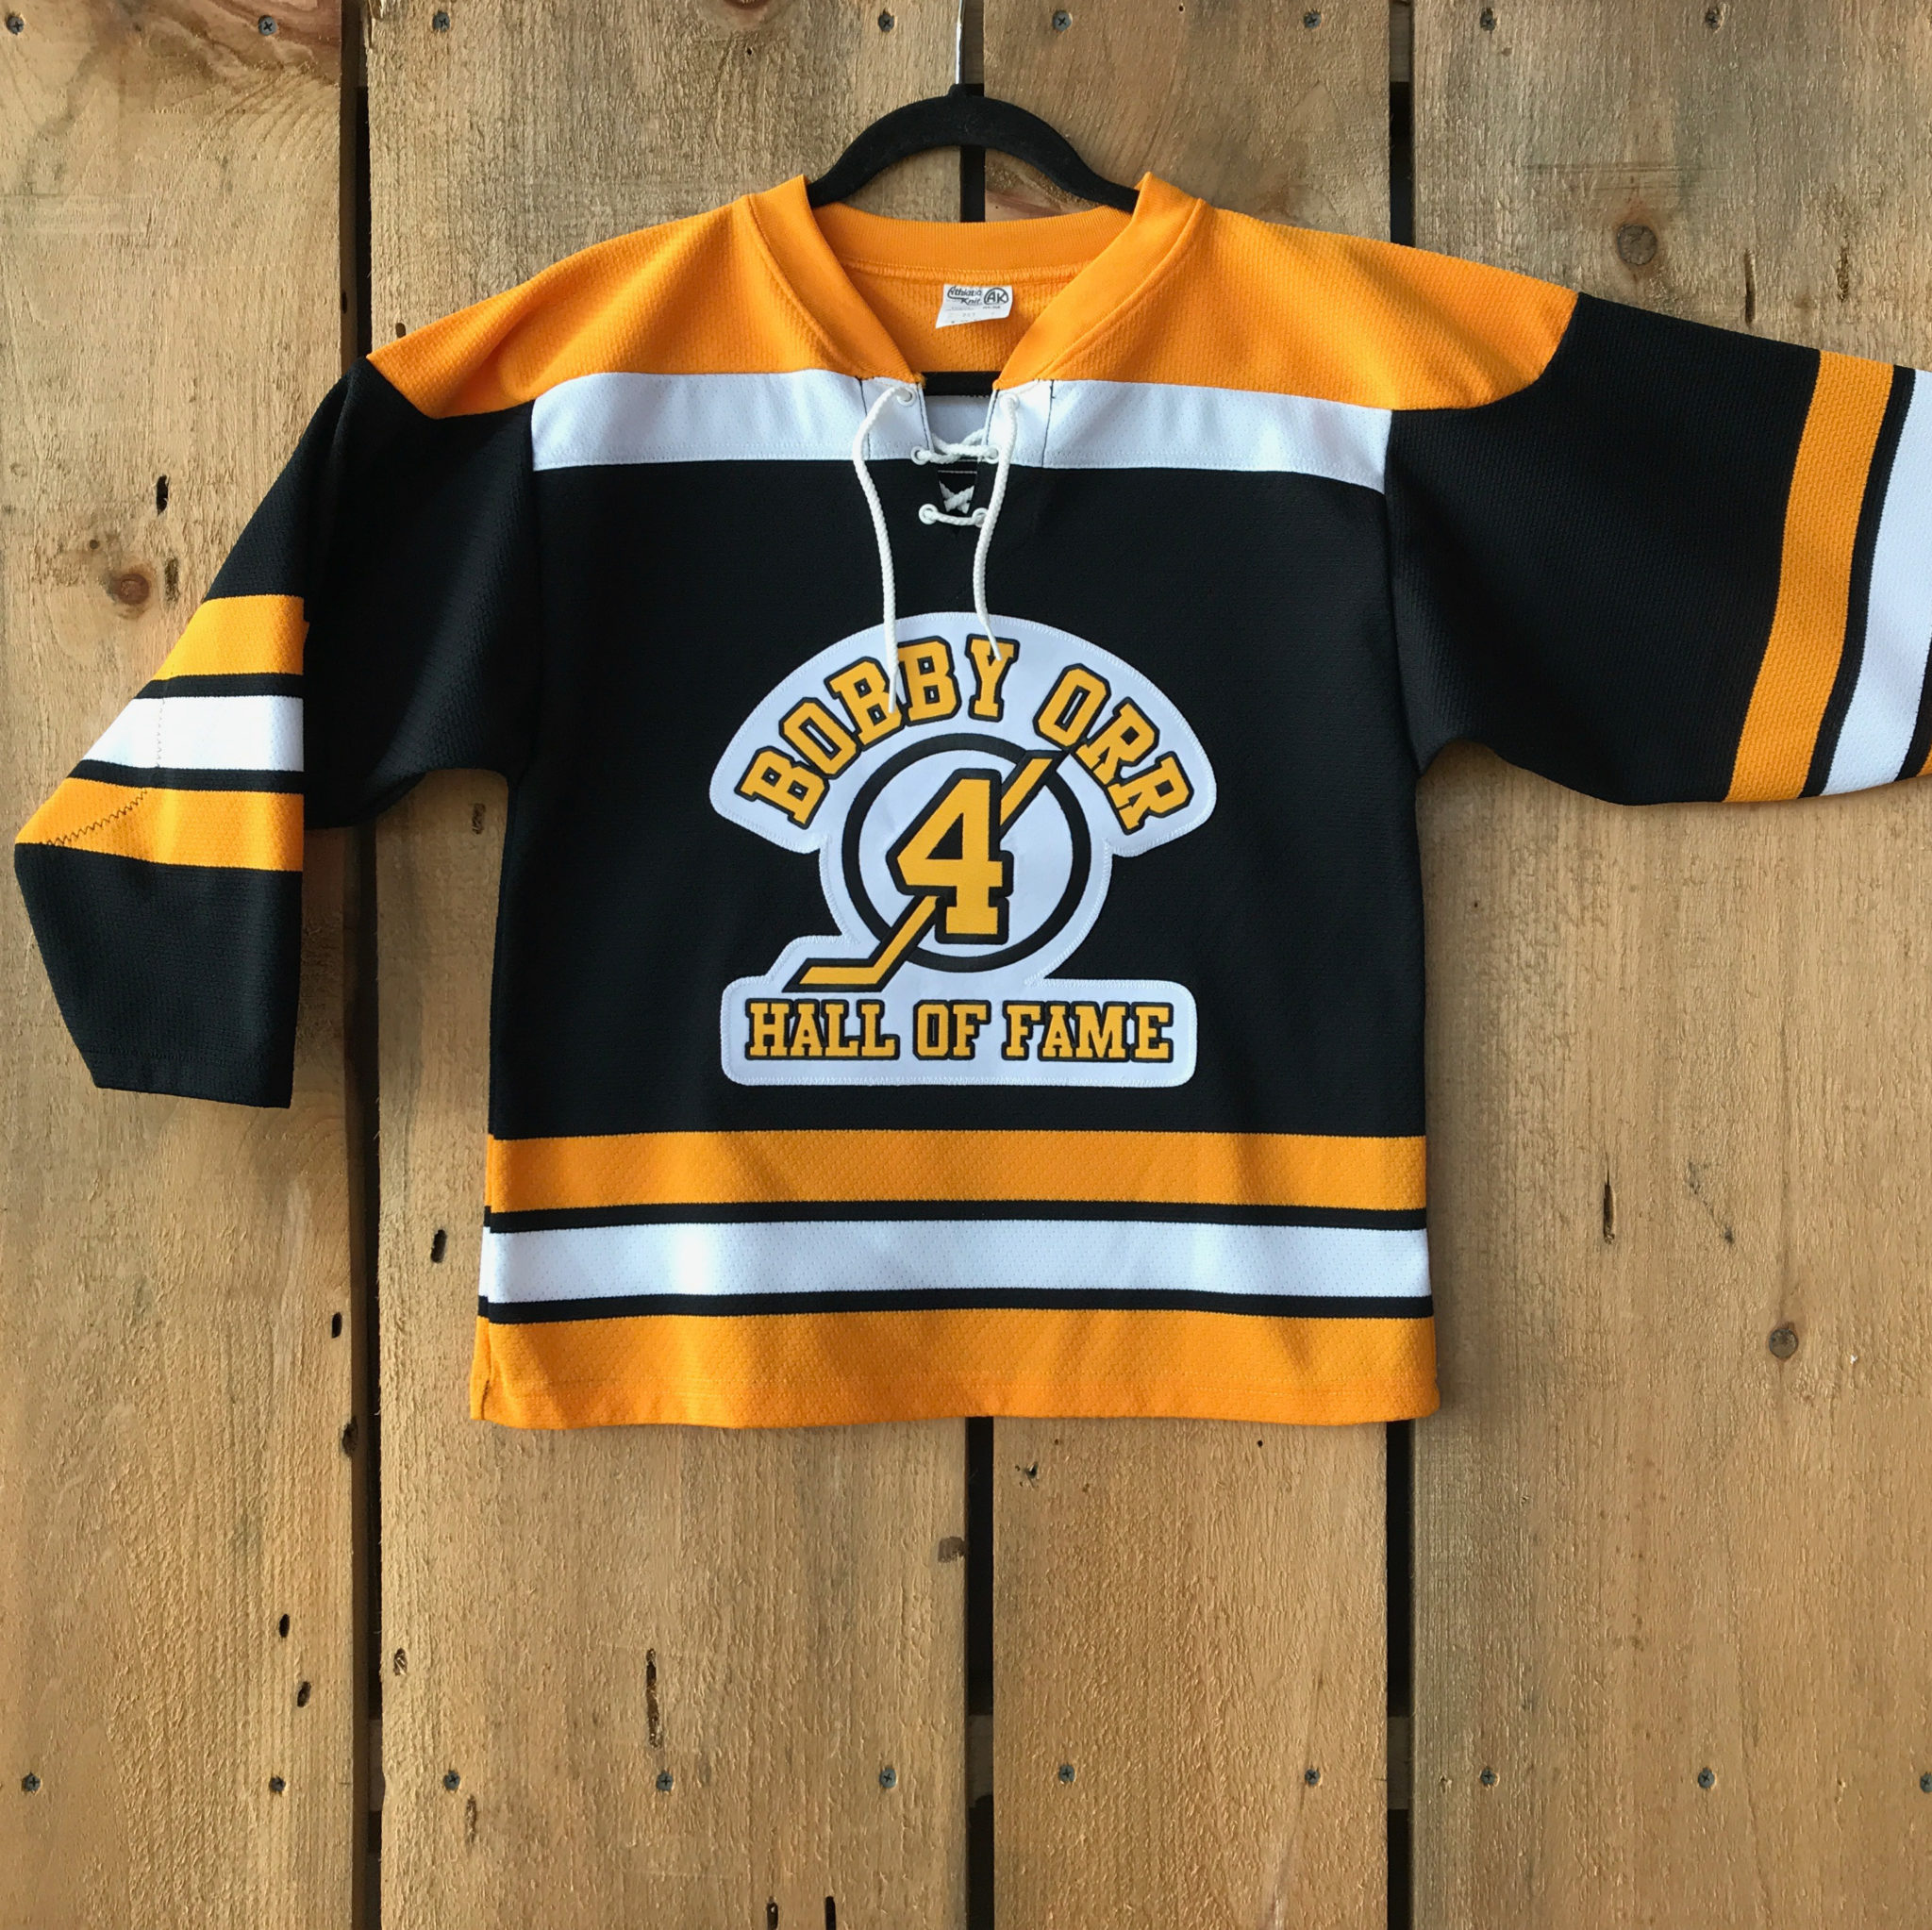 Pittsburgh Penguins Hall of Fame gear